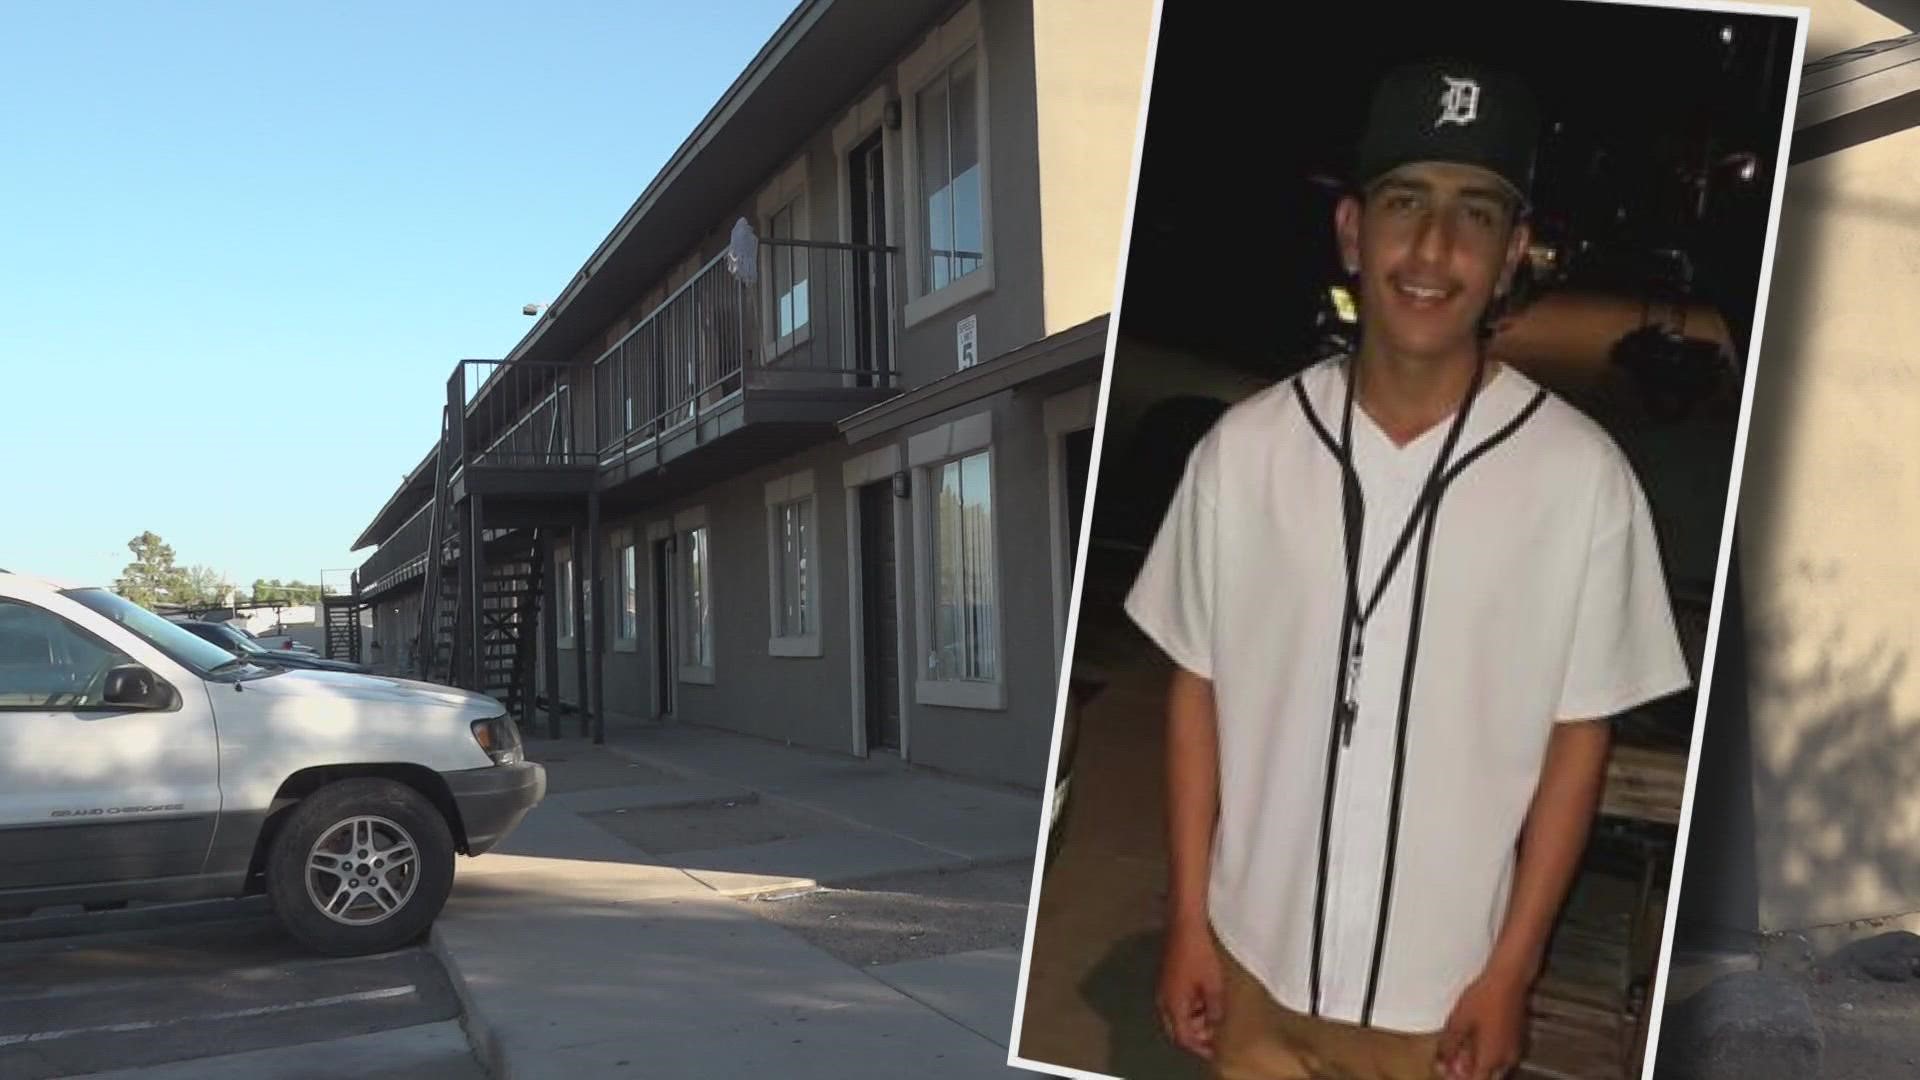 There’s a renewed push for answers after a Valley man is shot dead on his doorstep.